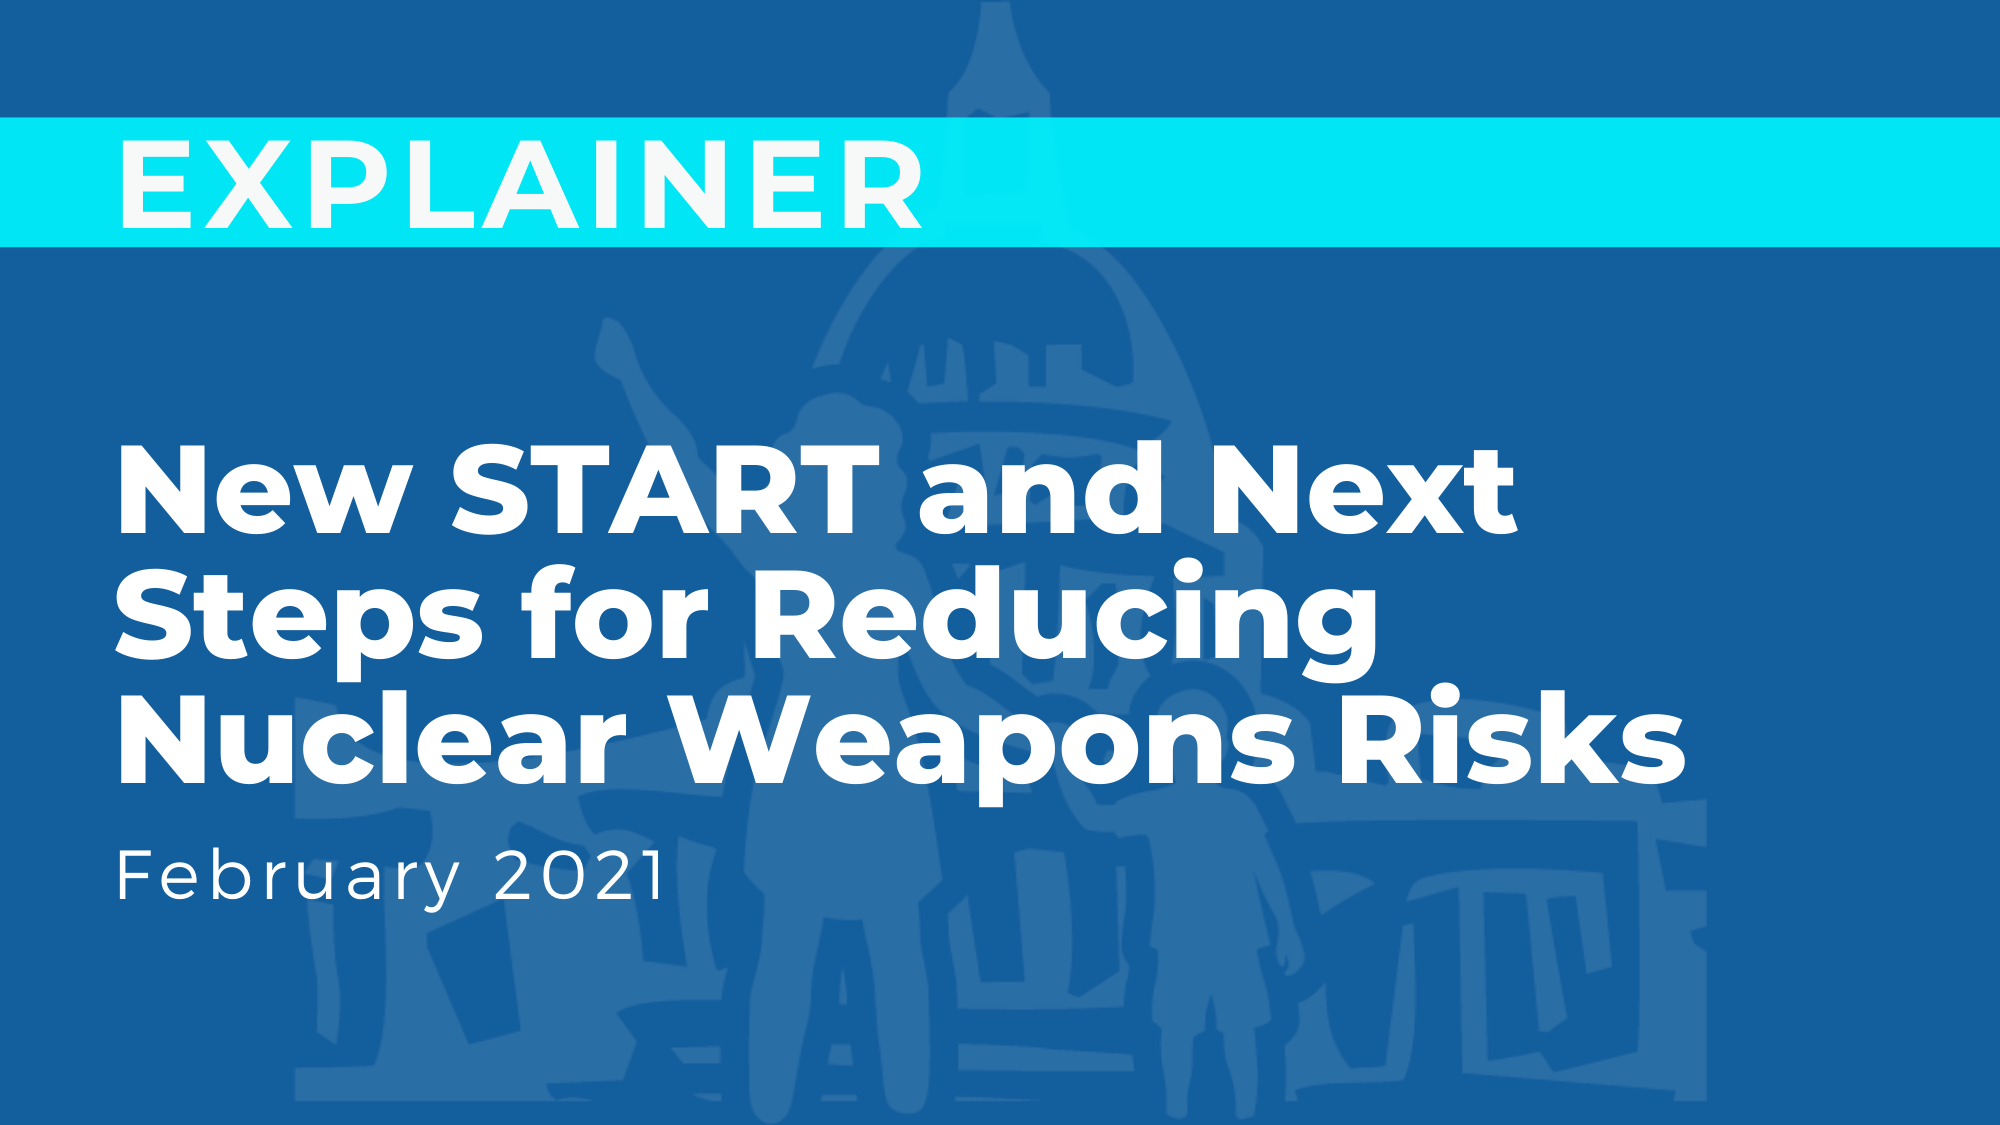 New START and Next Steps for Reducing Nuclear Weapons Risks